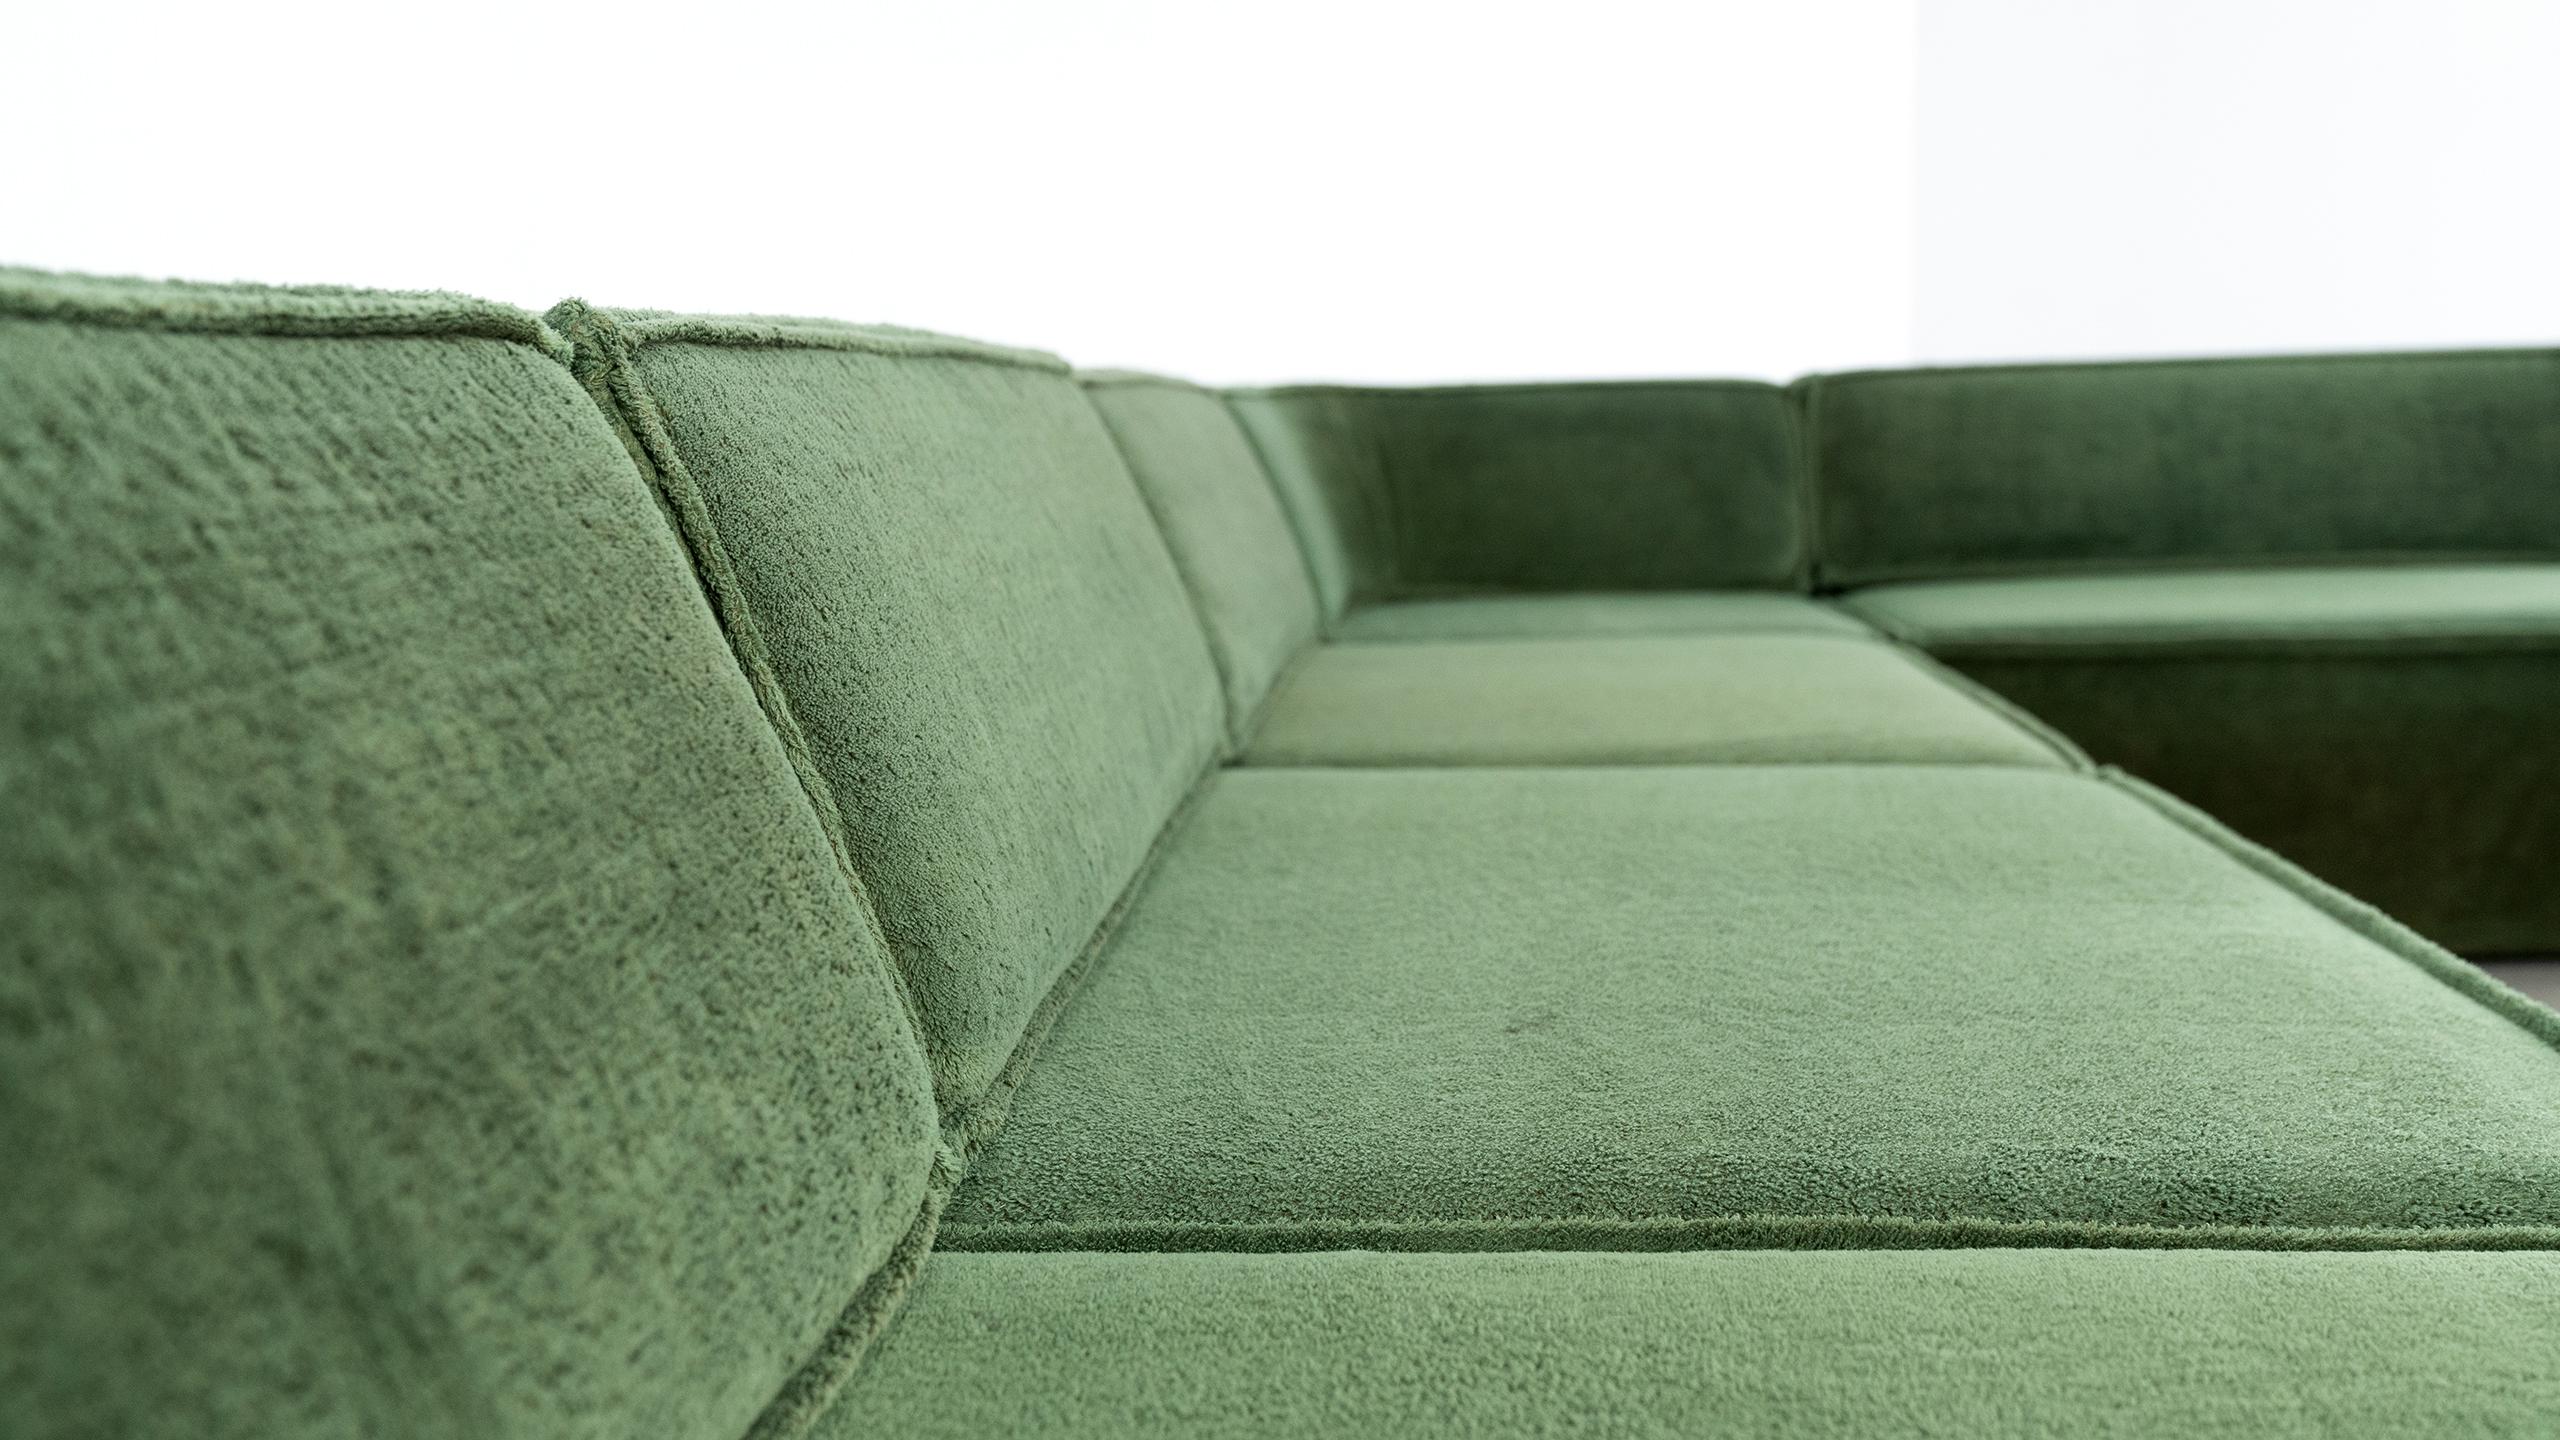 COR Trio Modular Sofa, Giant Landscape in Green, 1972 by Team Form AG, Swiss 12